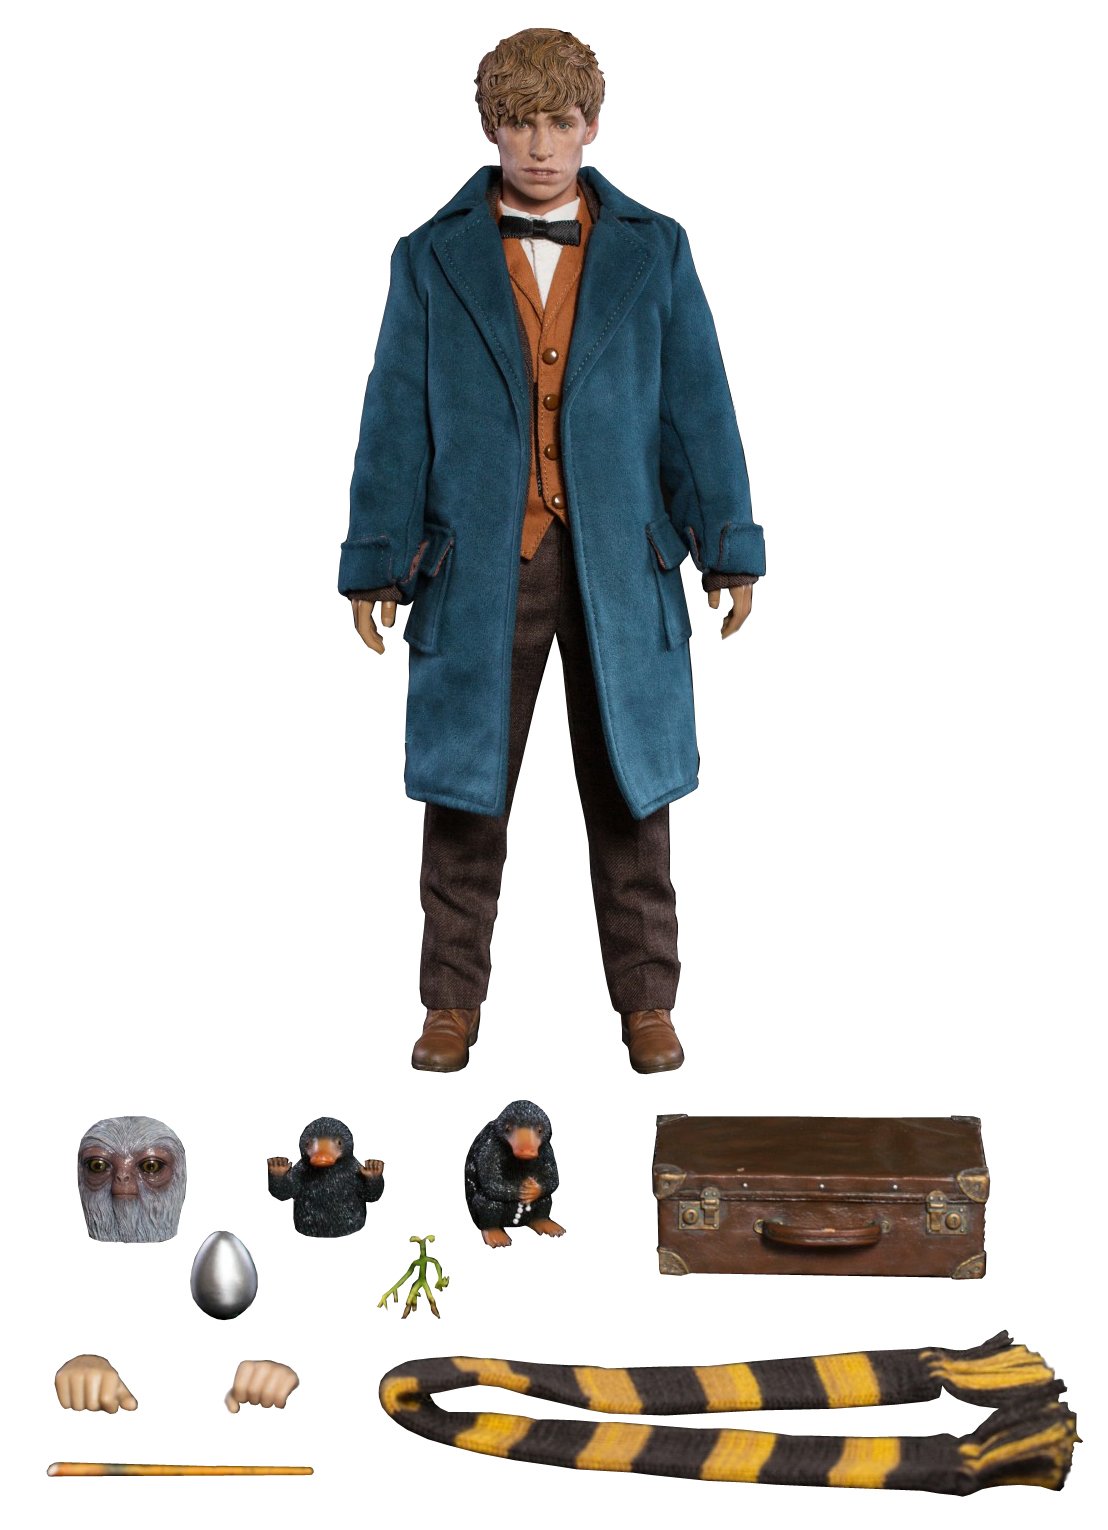 Star Ace Toys Fantastic Beasts and Where to Find Them: Newt Scamander 1:6 Scale Action Figure